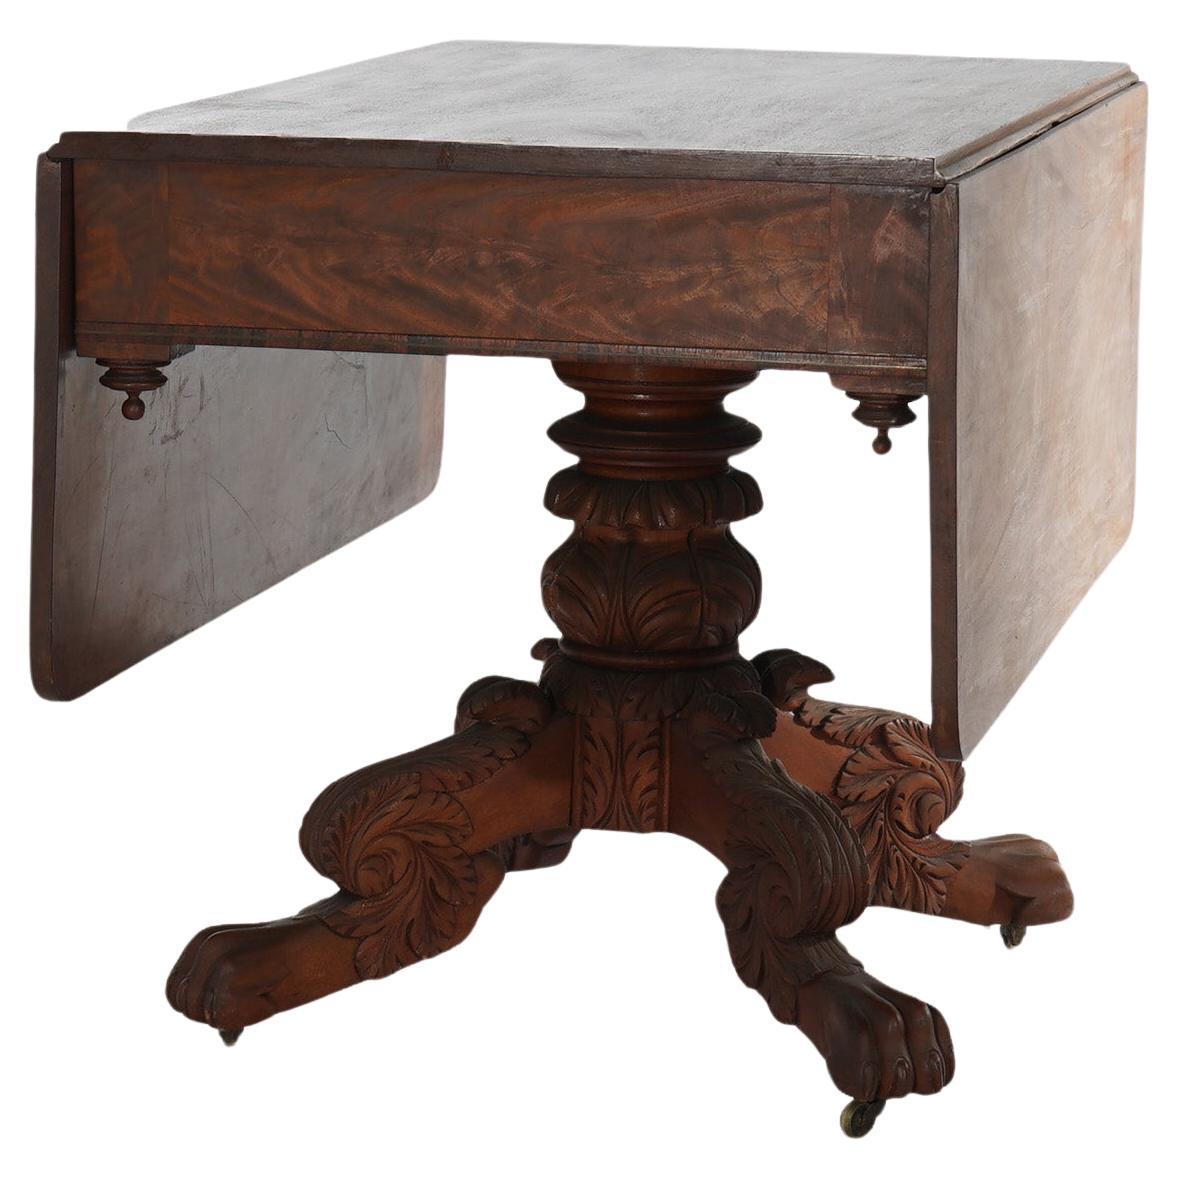 Antique Neoclassical American Empire Carved Flame Mahogany Drop Leaf Table c1880 For Sale